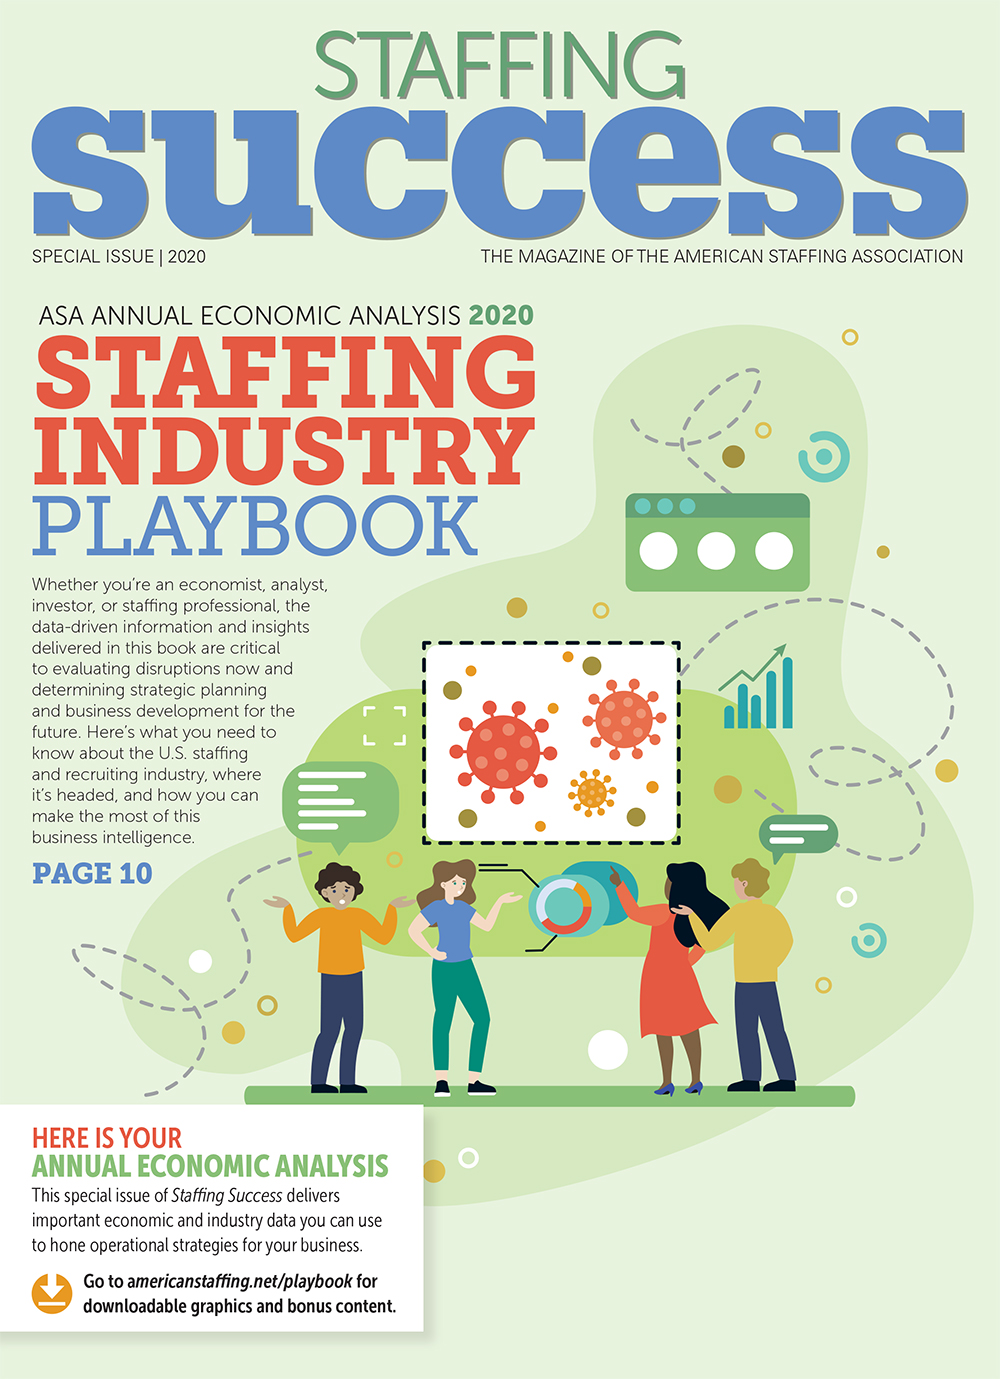 ASA Staffing Industry Playbook 2020